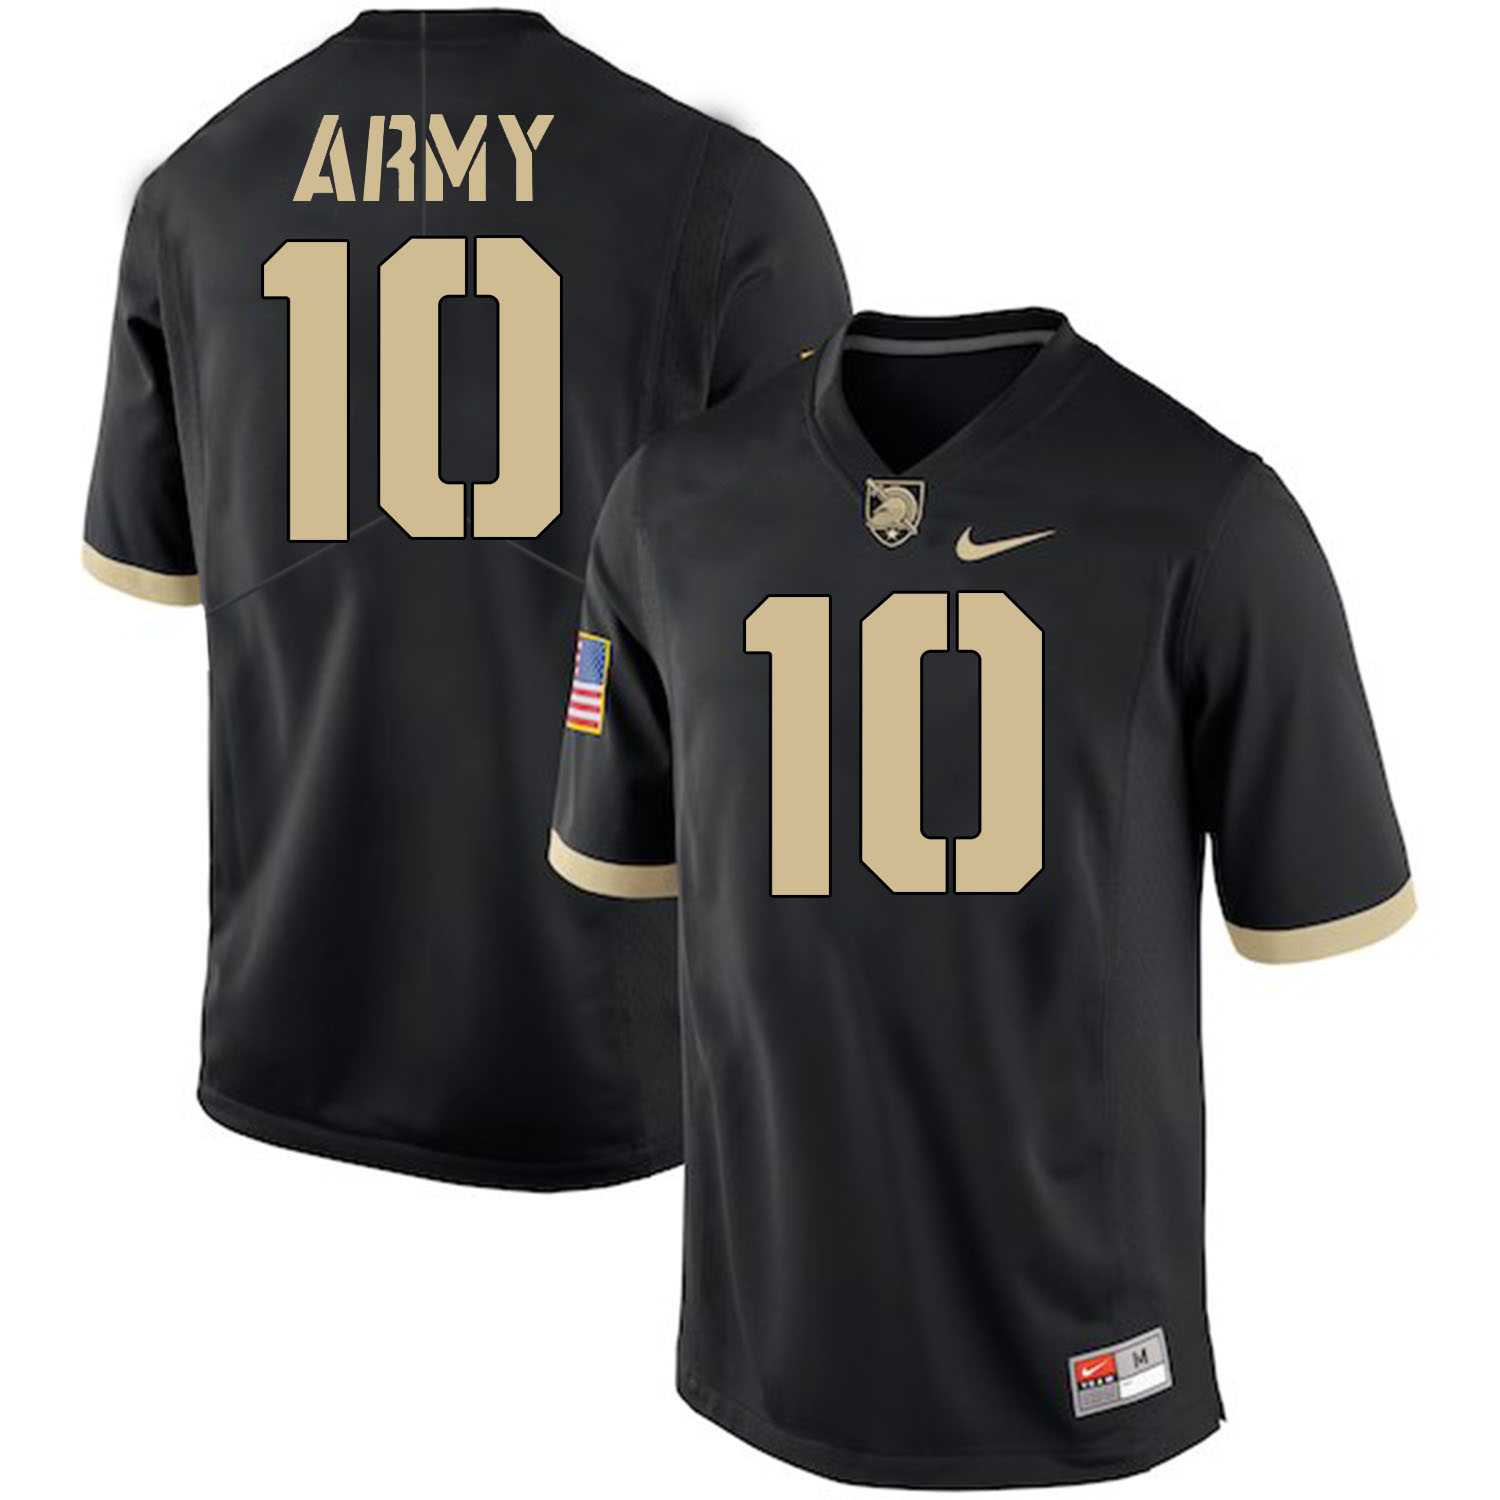 Army Black Knights #10 Mike Reynolds Black College Football Jersey